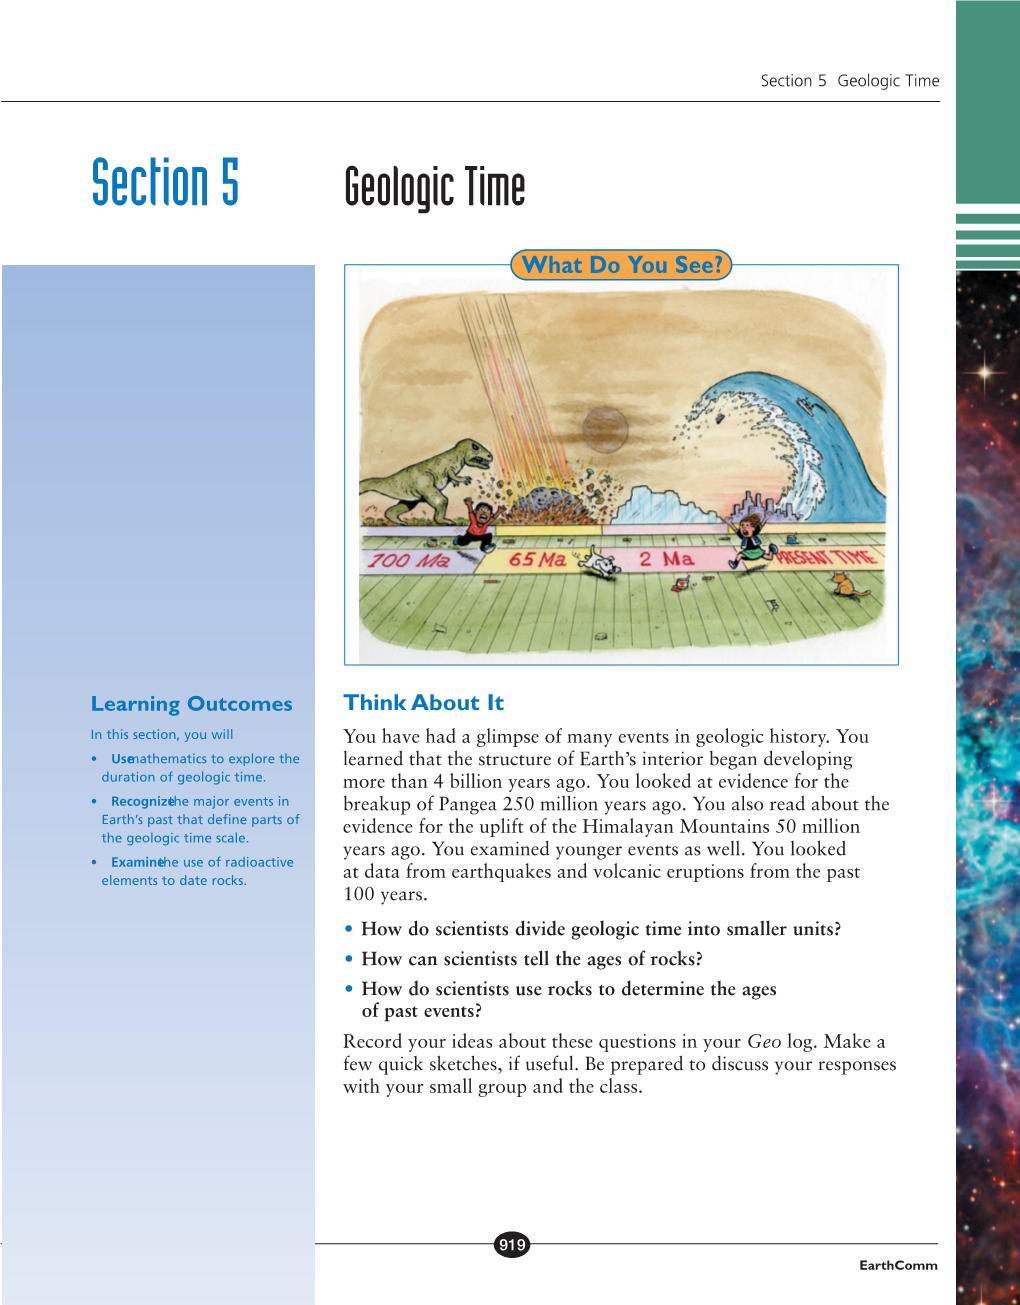 Section 5 Geologic Time